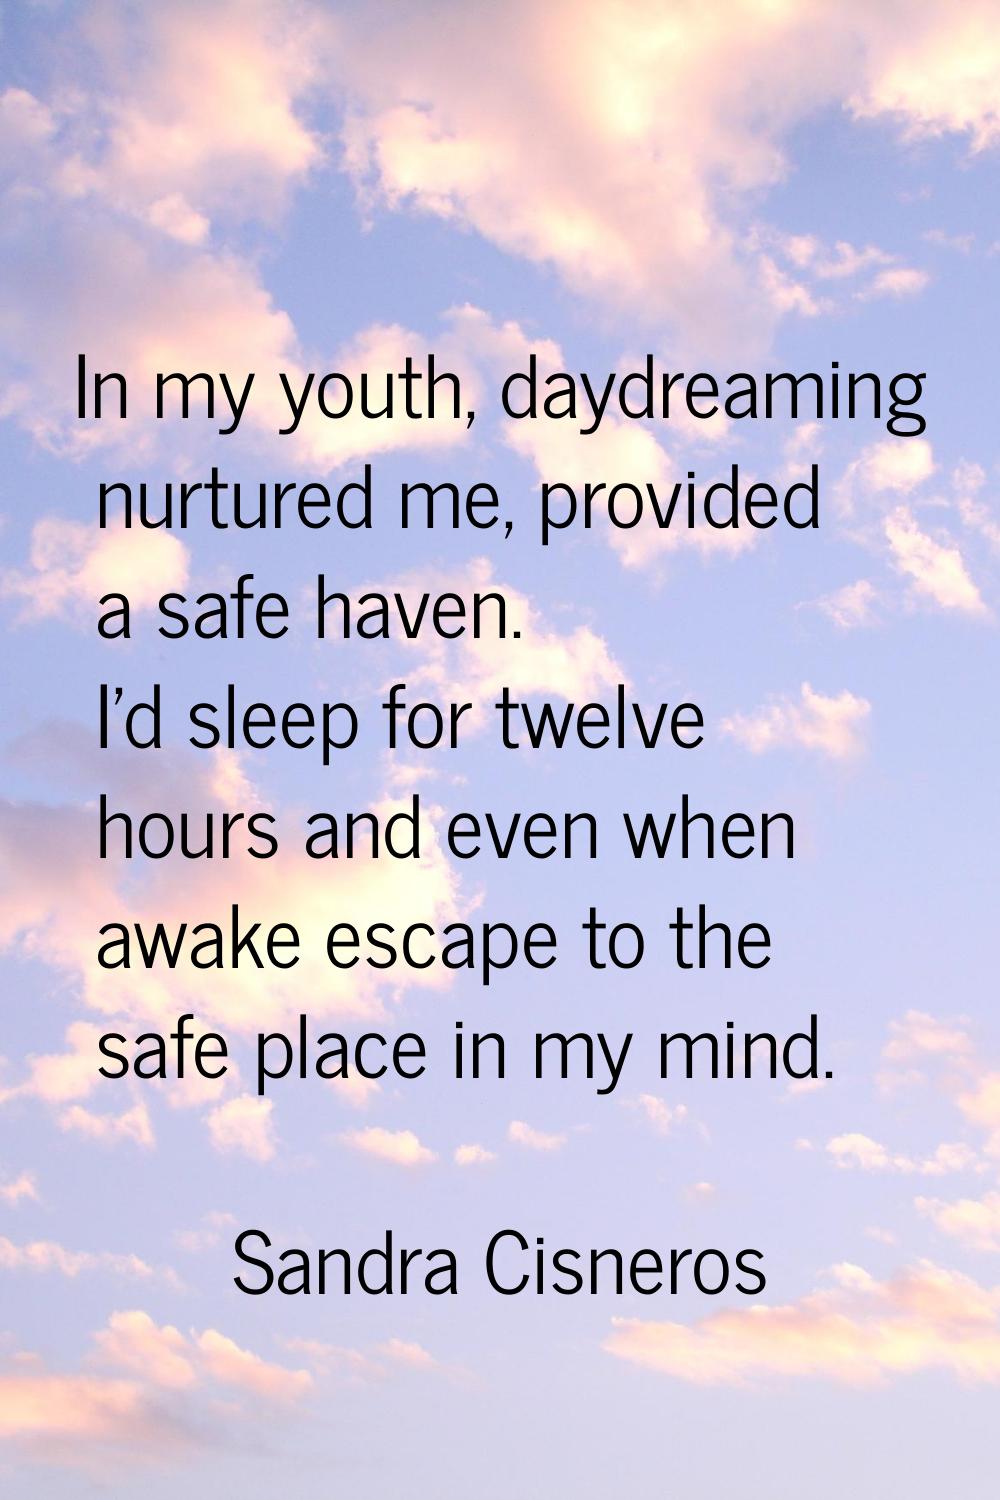 In my youth, daydreaming nurtured me, provided a safe haven. I'd sleep for twelve hours and even wh